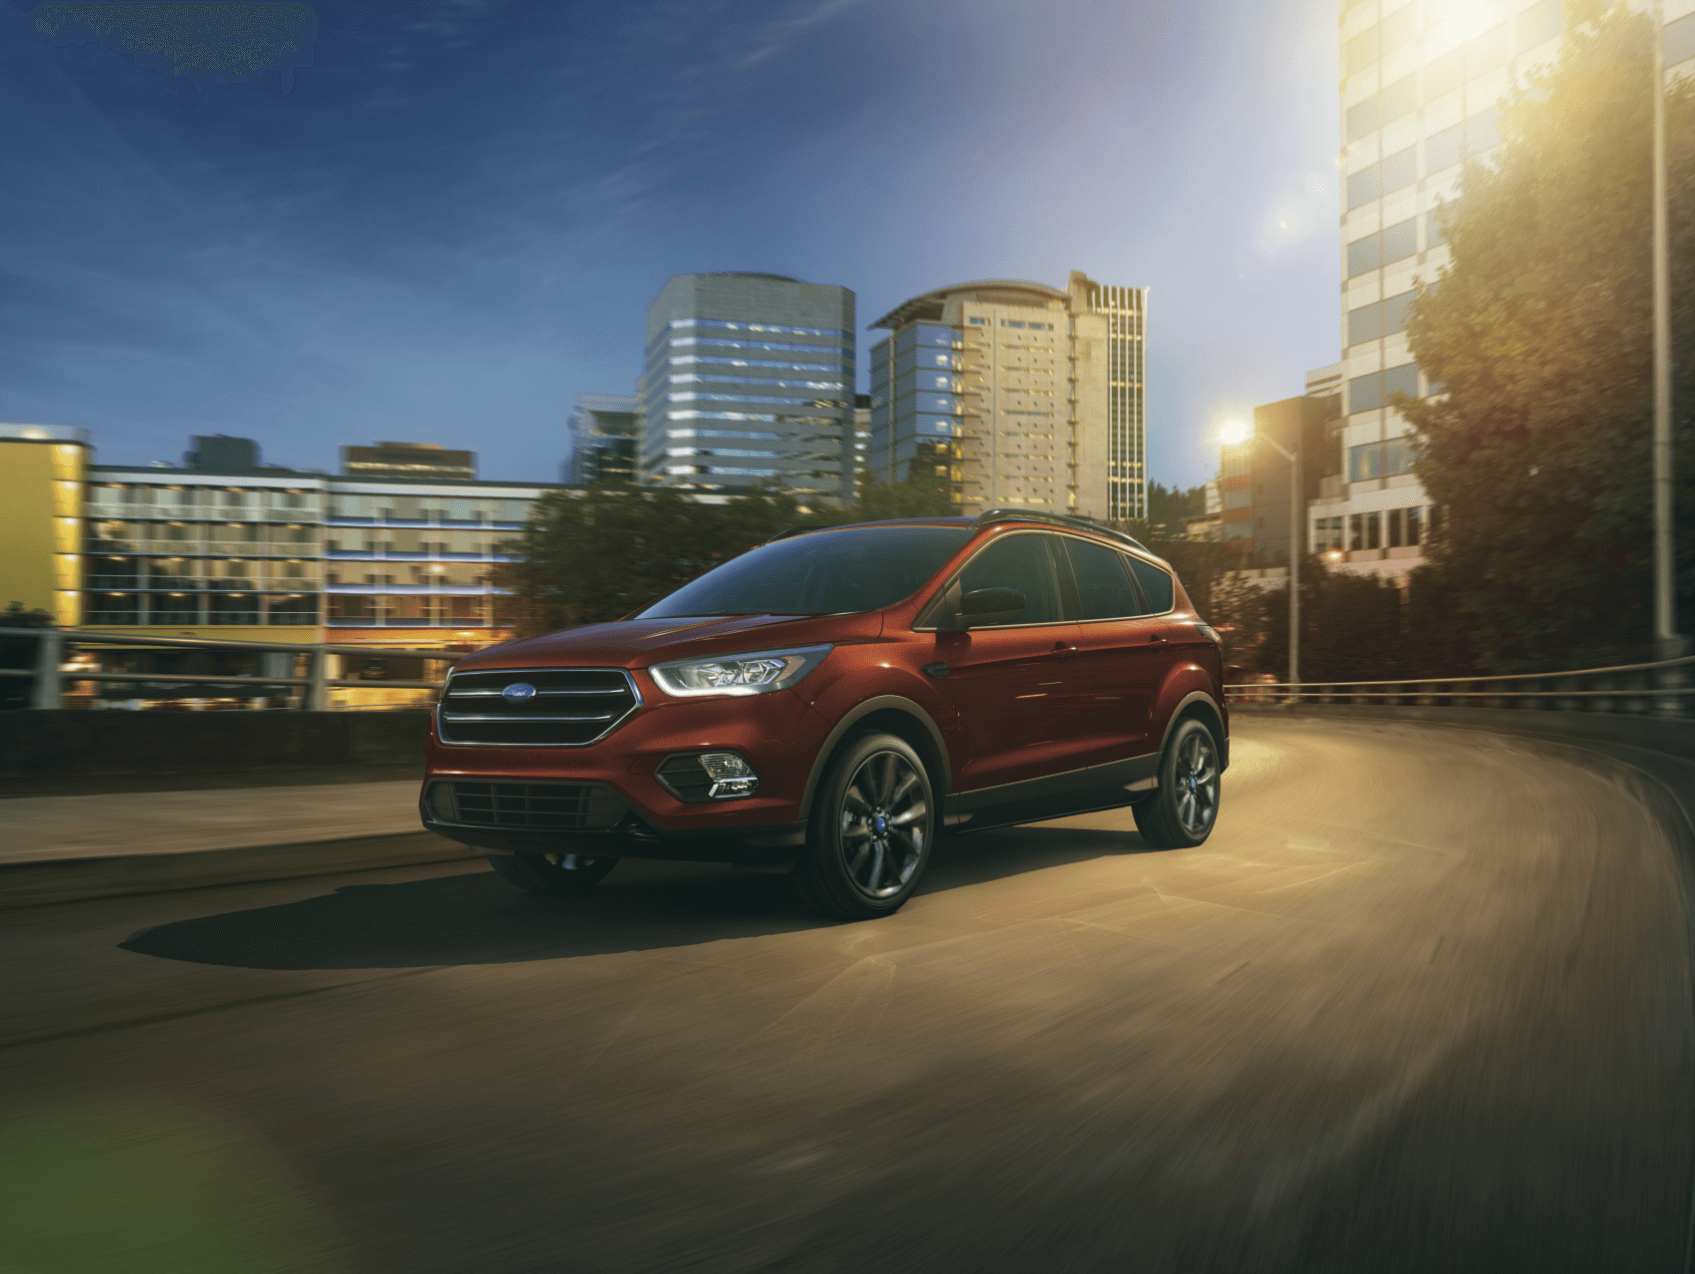 Used Ford Dealer near Cortland NY 2019 Ford Escape SE Red Night City Maguire Ford